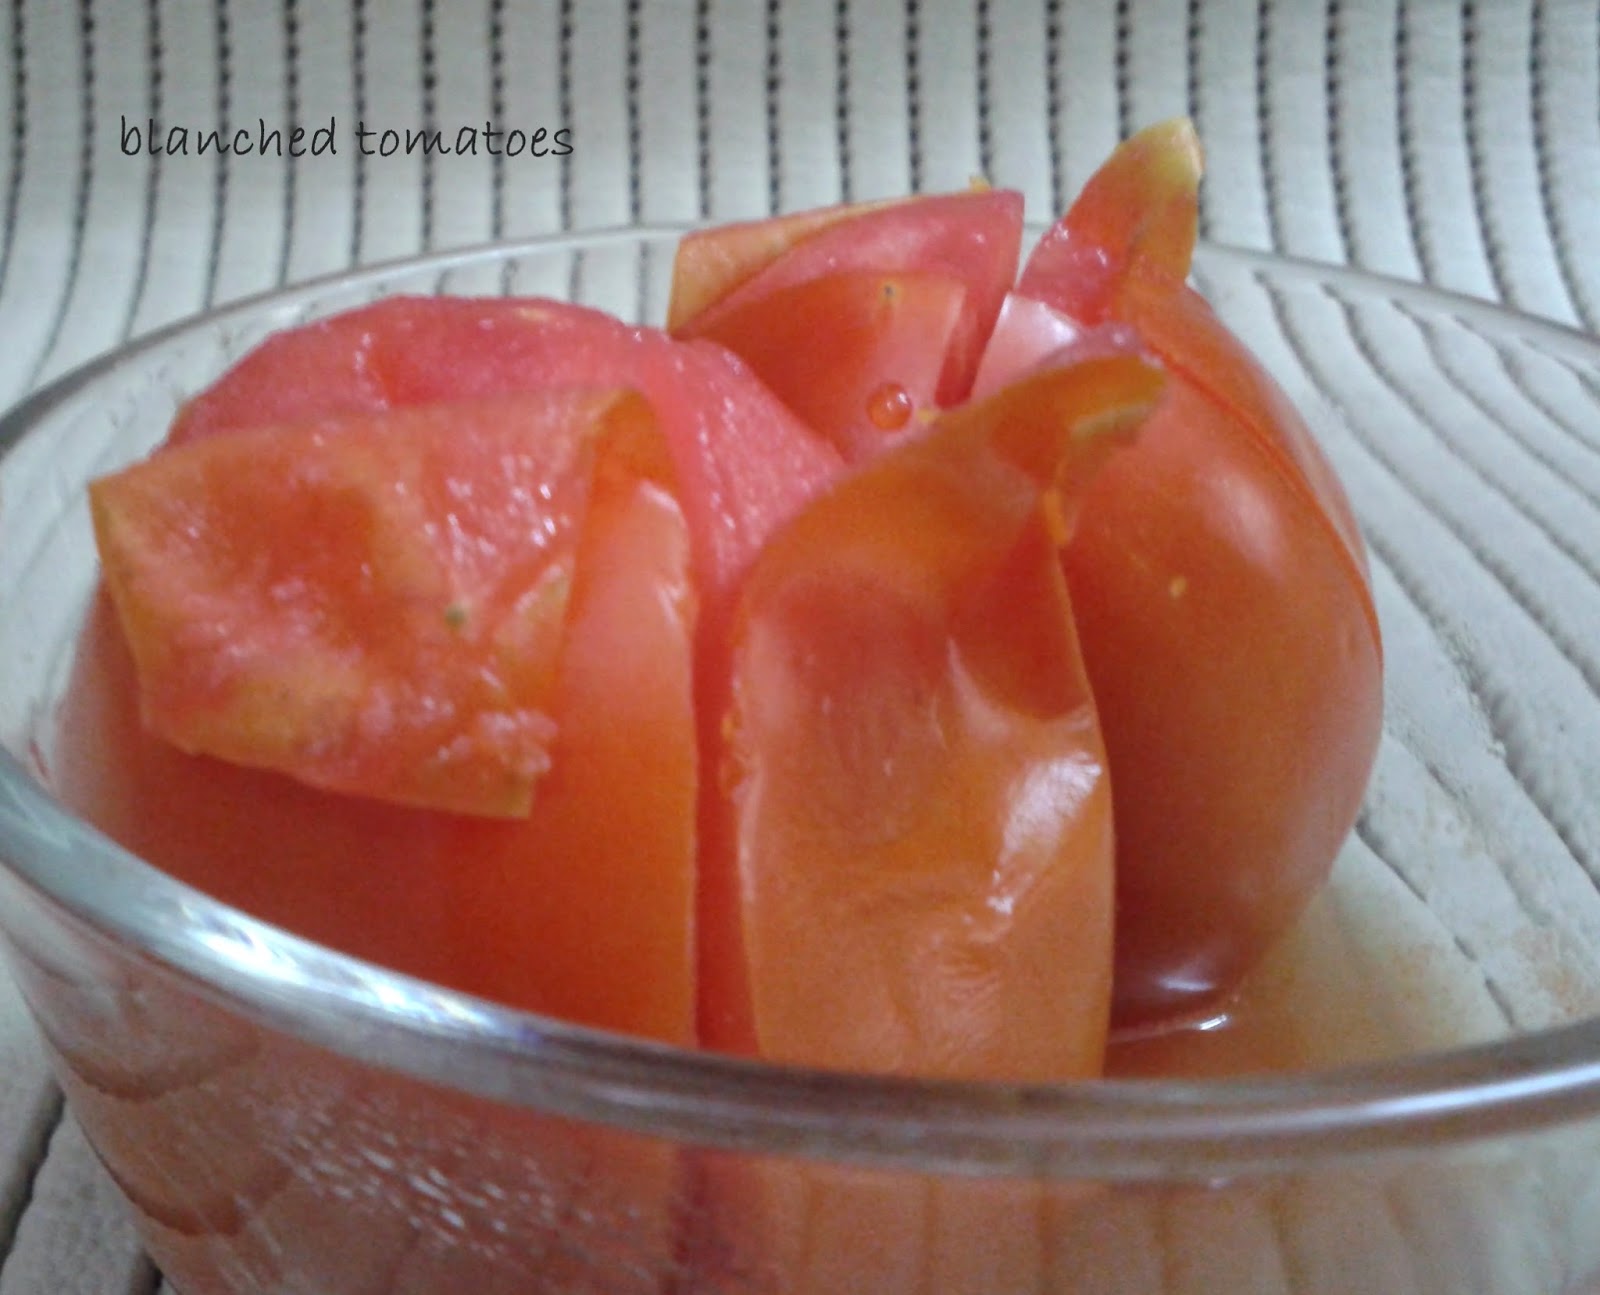 http://www.paakvidhi.com/2015/04/how-to-blanch-tomatoes-in-microwave.html